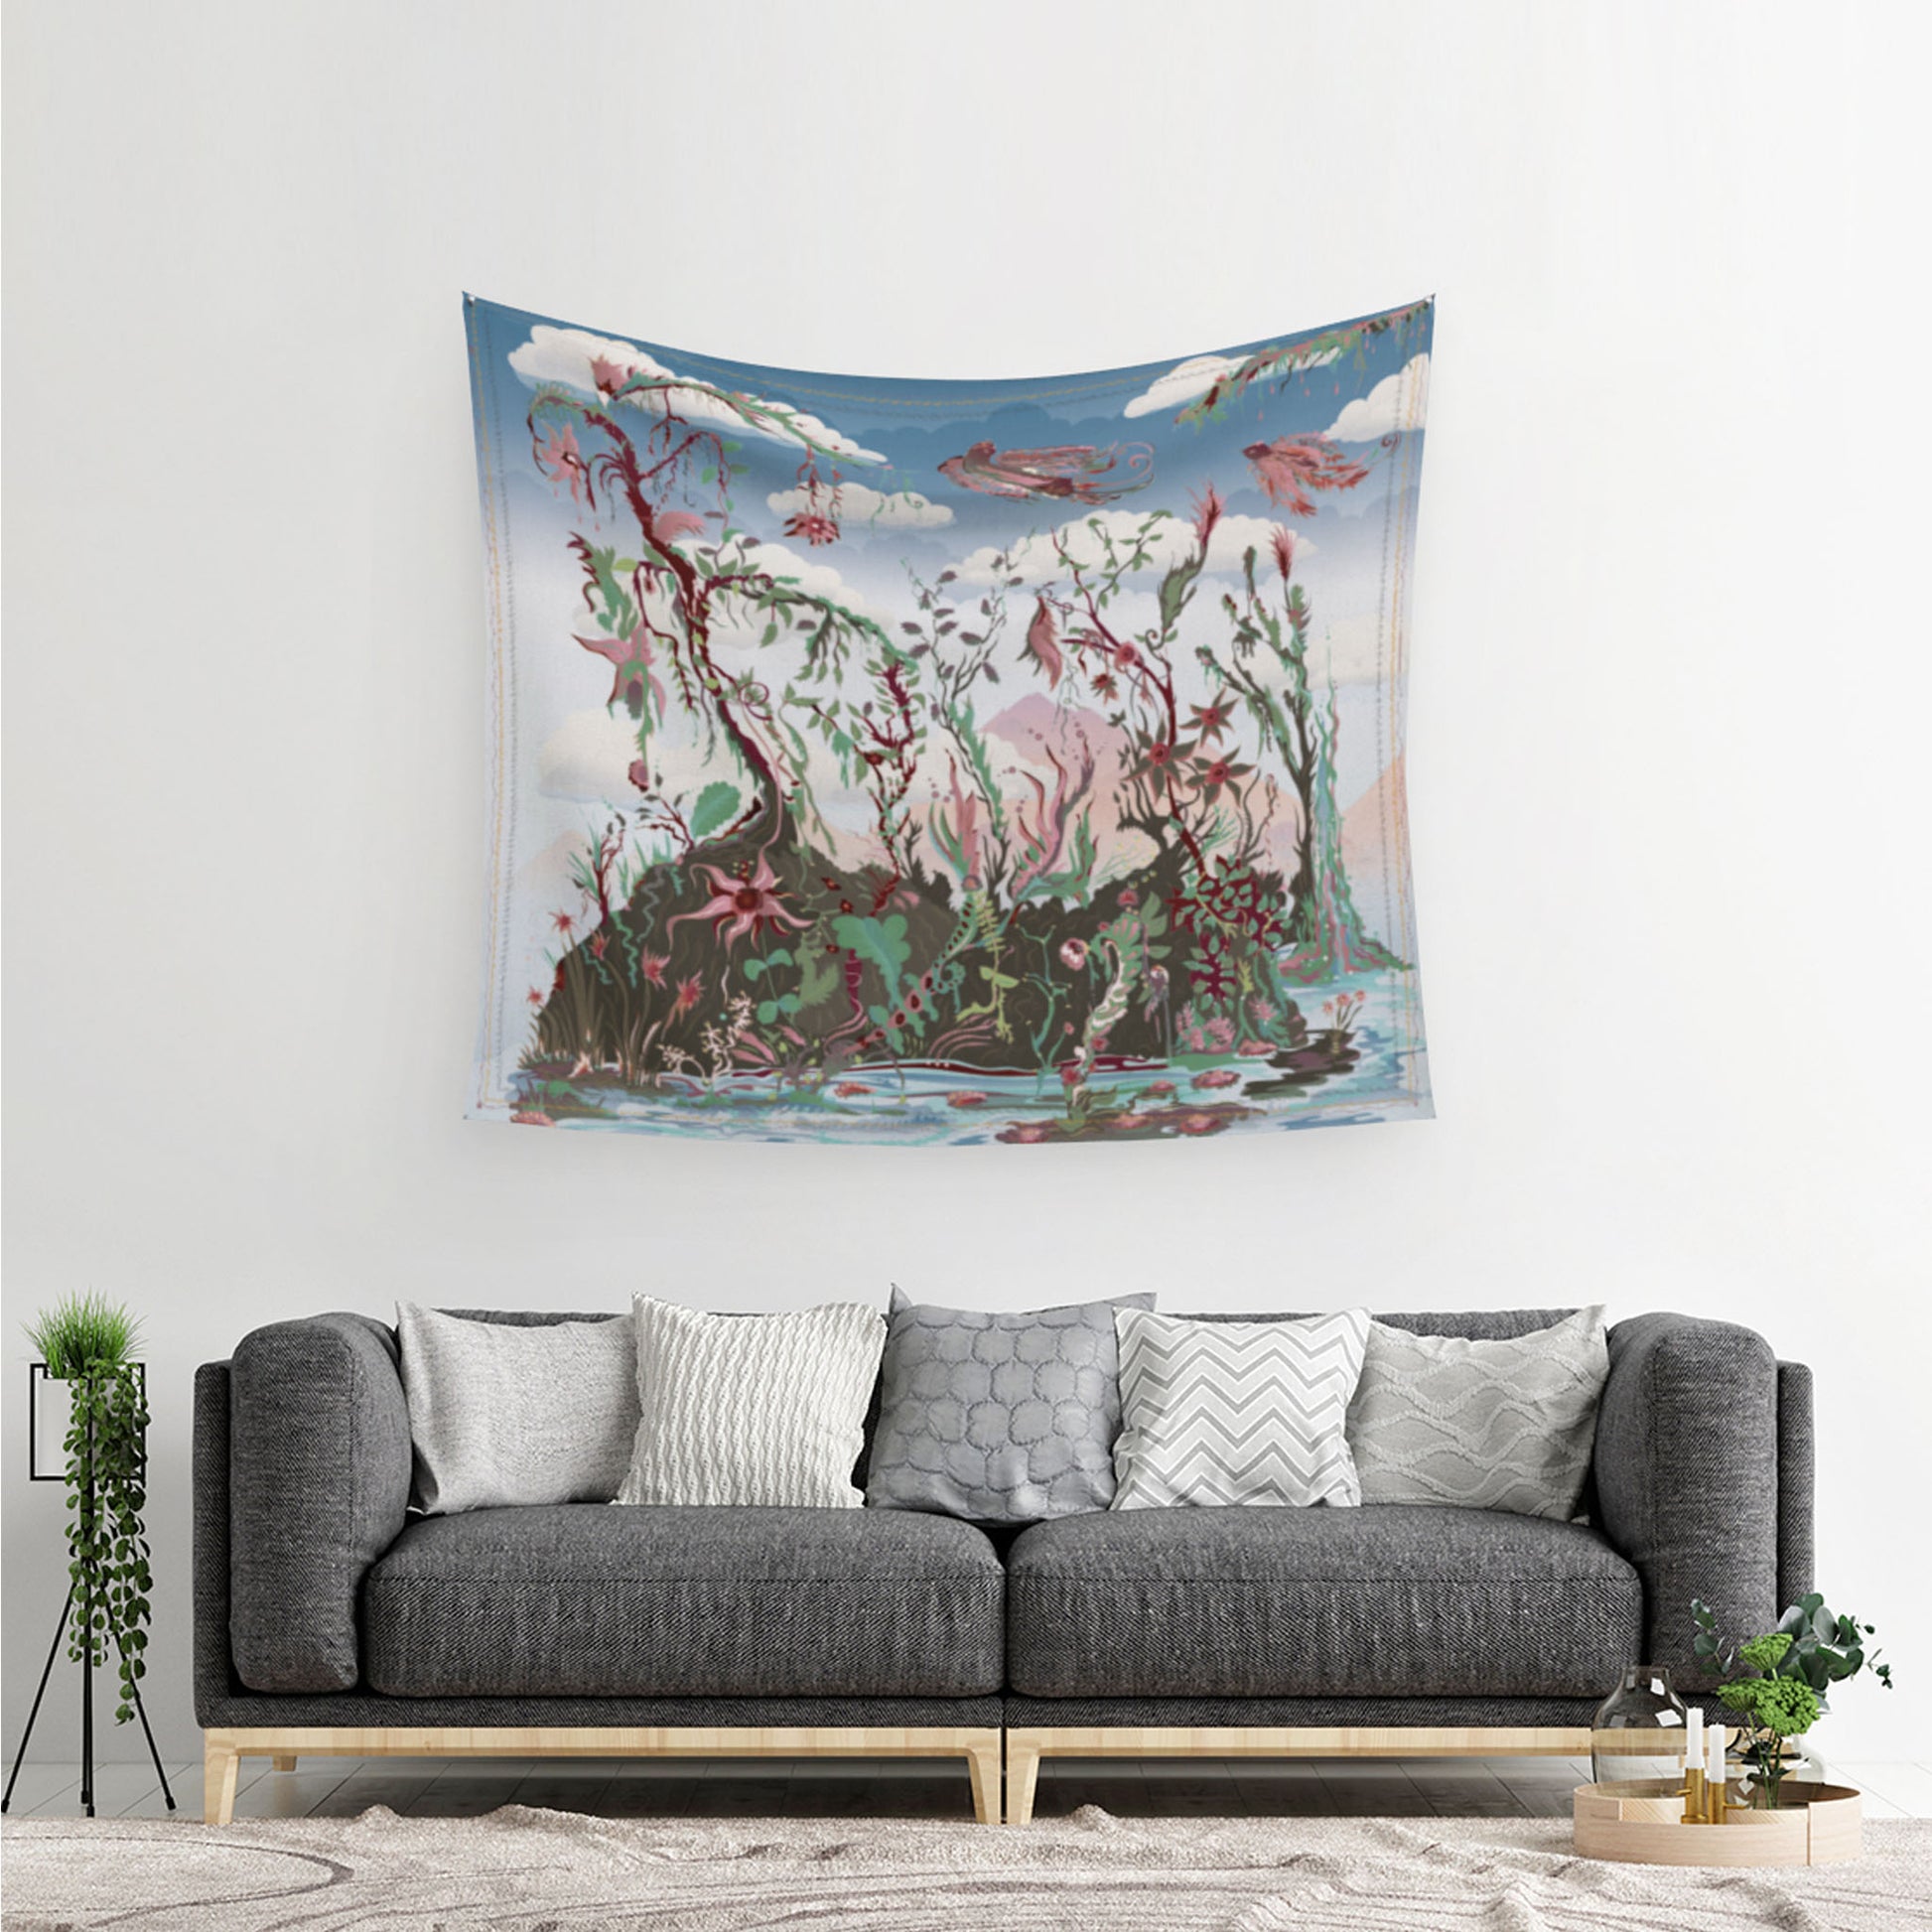 mockup for digital design for tapestry showing the hummingbird queen being followed closely by the hummingbird king over an imaginary land of plants and trees, all beneath a cloud cover the tapestry is hanging over a couch with many pillows and a couch to illustrate how to use a tapestry